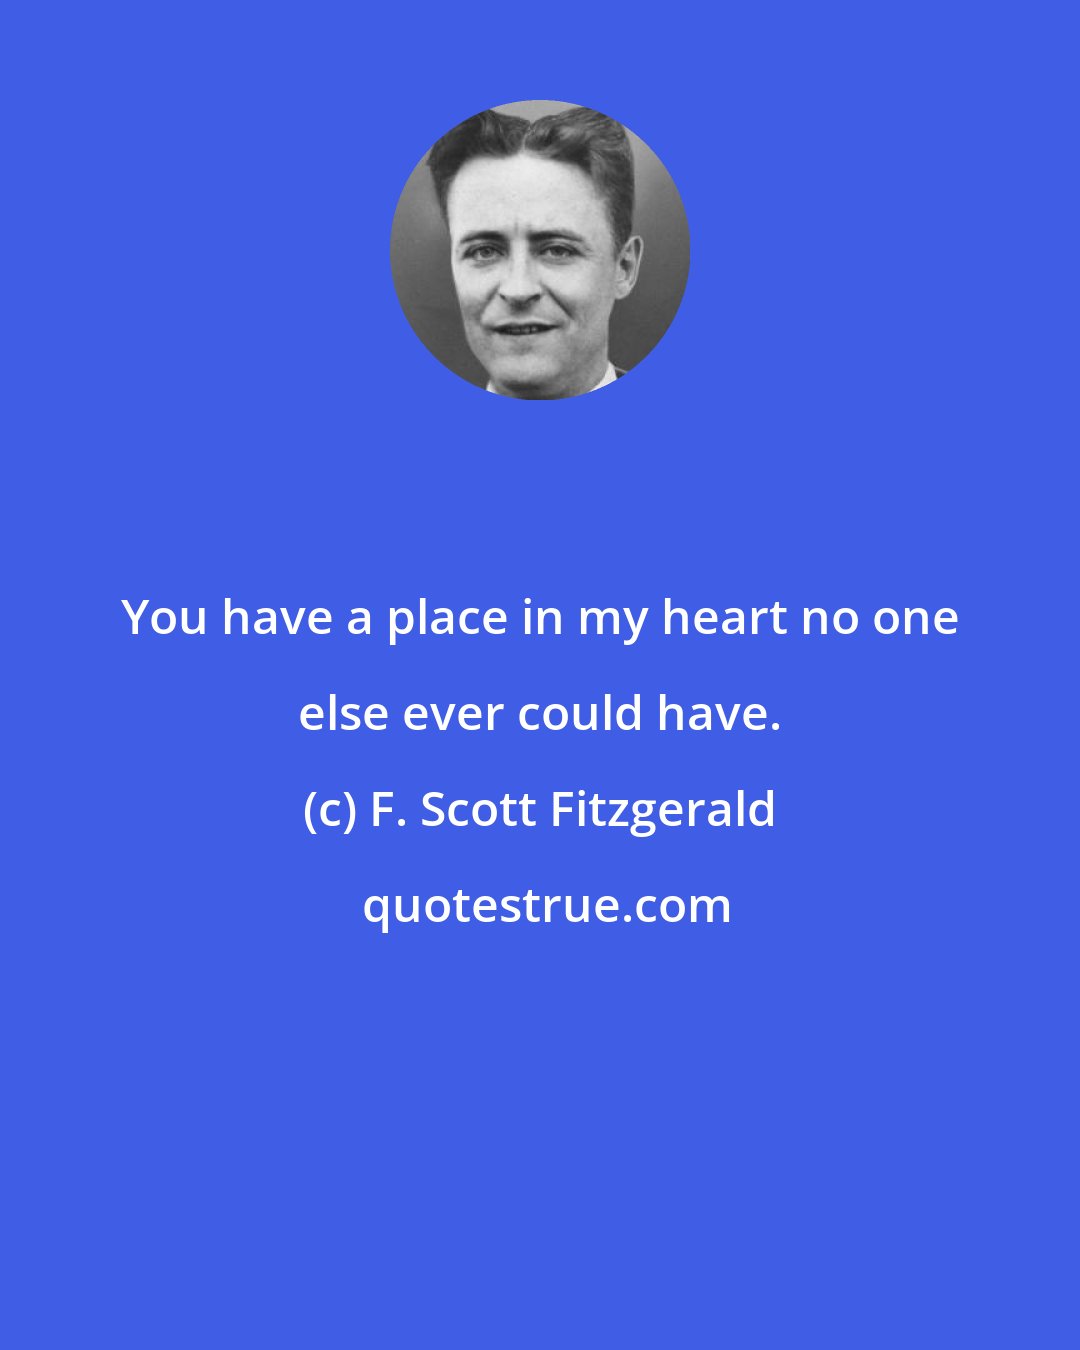 F. Scott Fitzgerald: You have a place in my heart no one else ever could have.